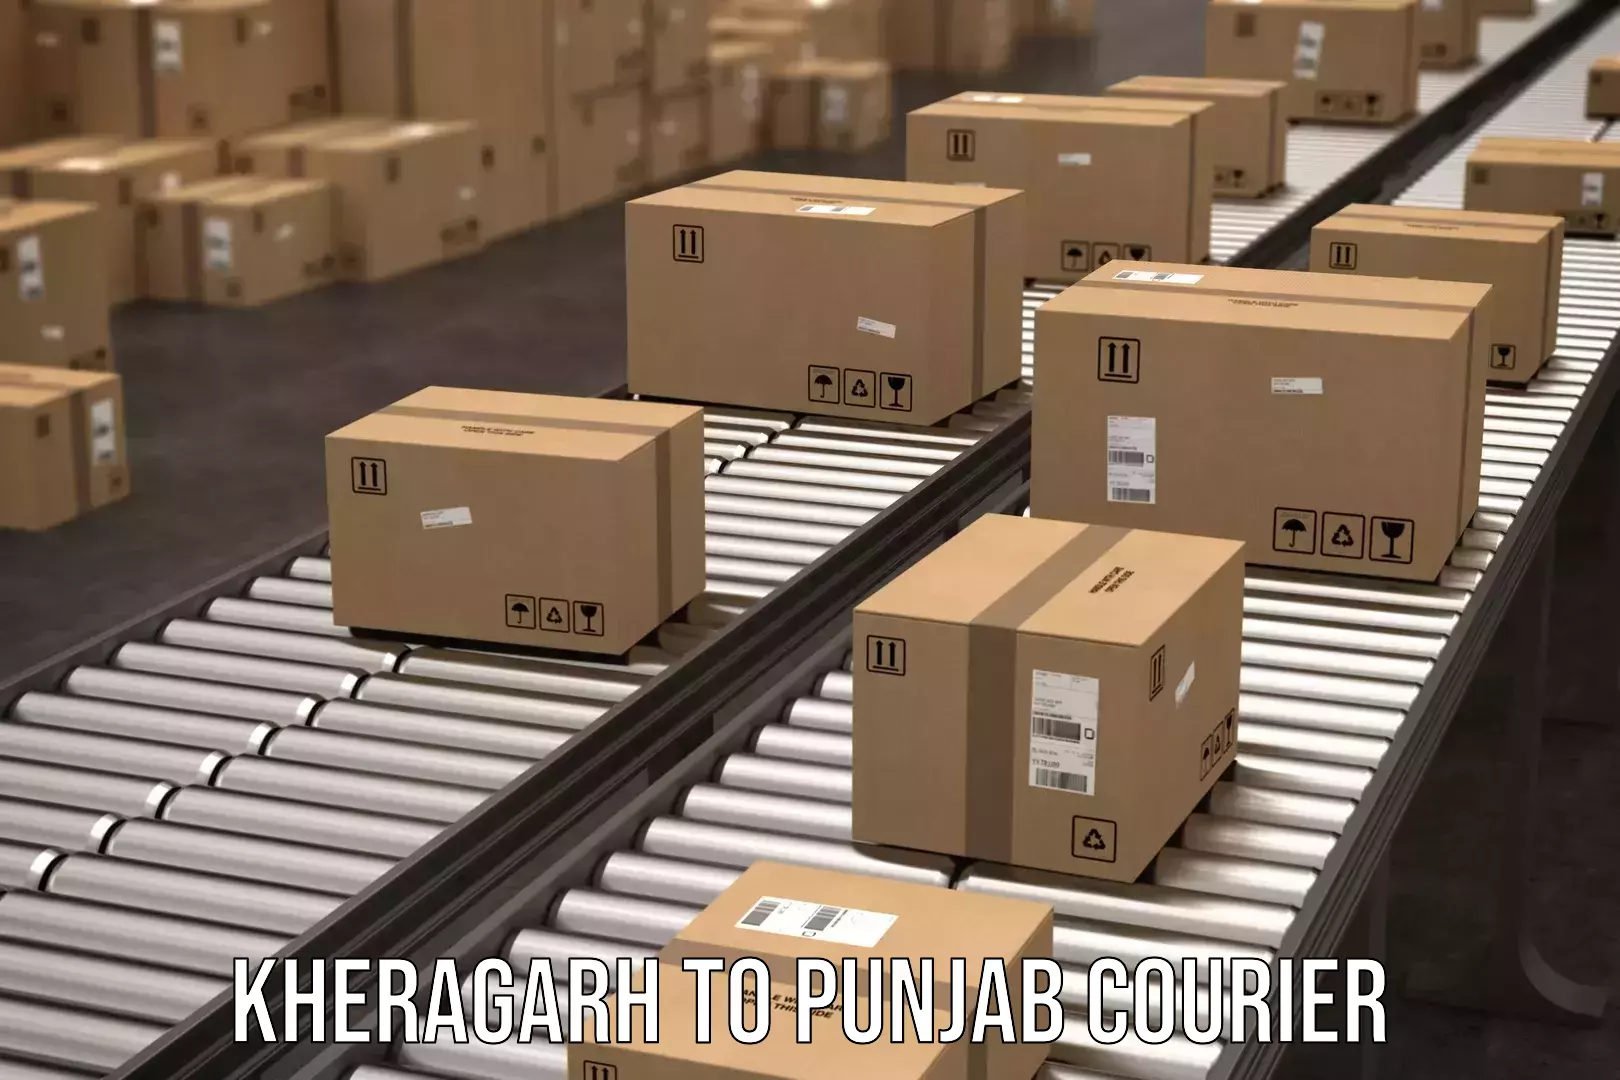 Global parcel delivery Kheragarh to Ludhiana